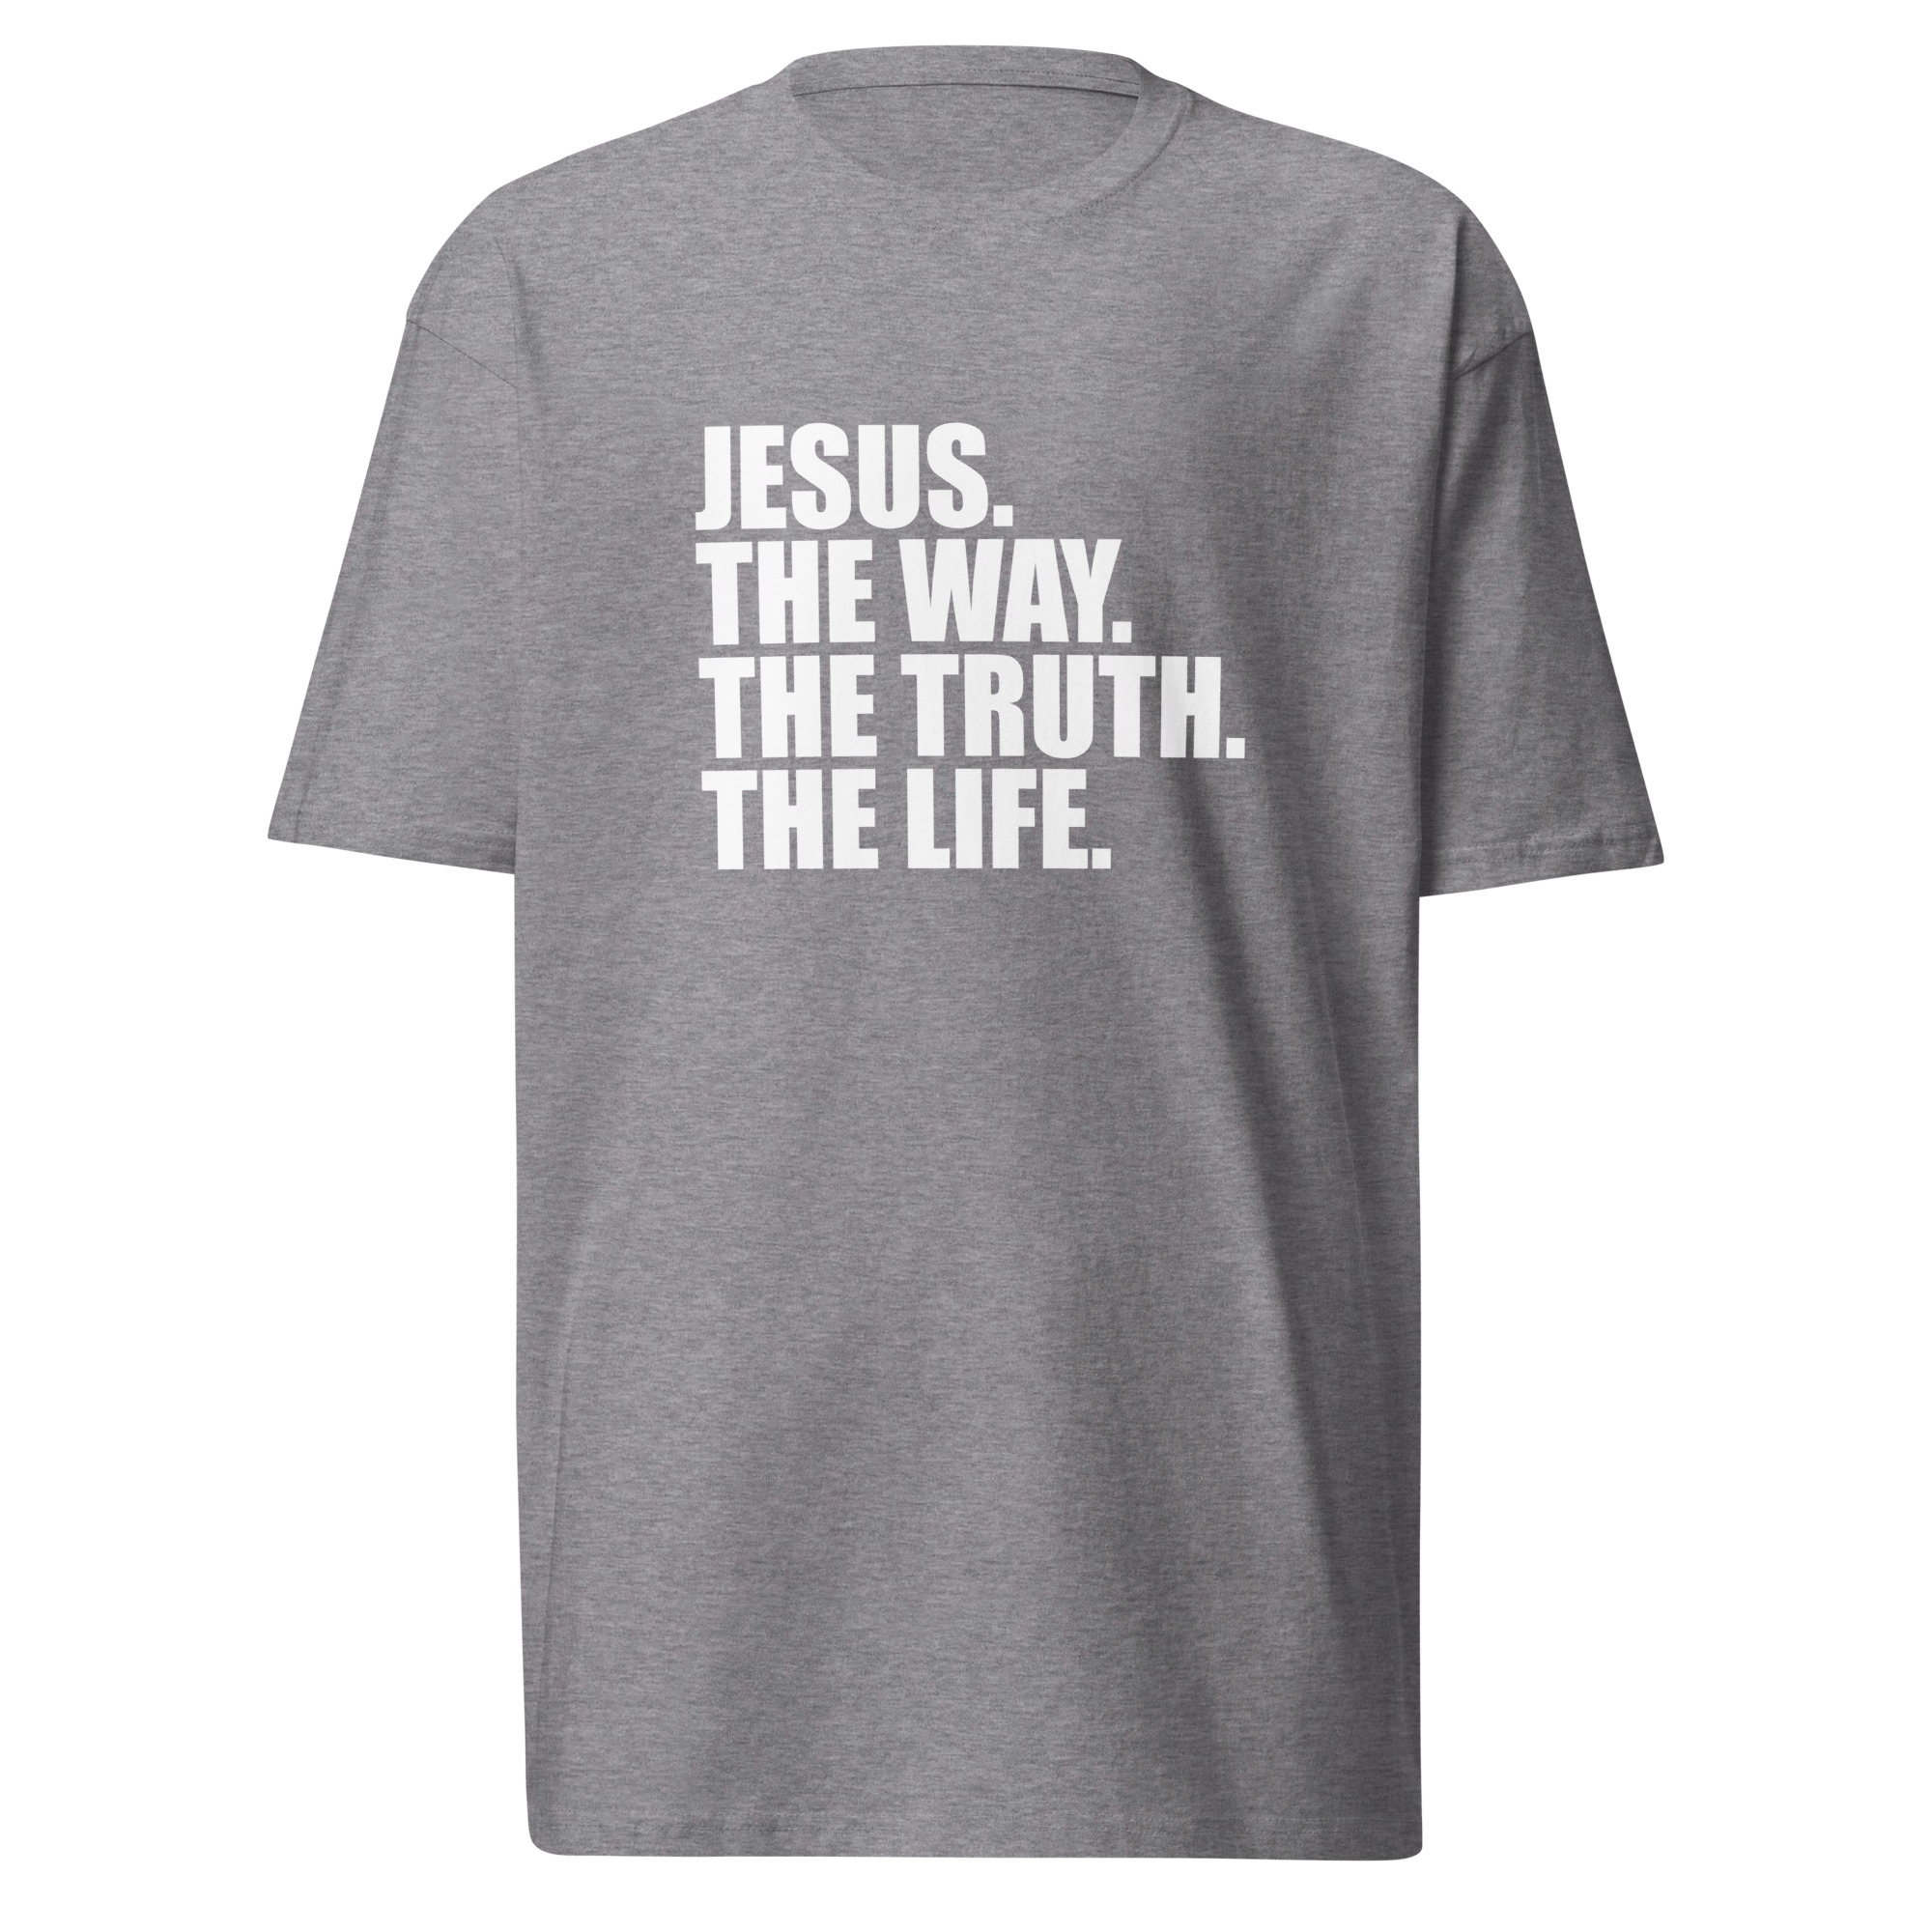 The Way. The Truth. The Life. T-Shirt - Carbon Grey / XL